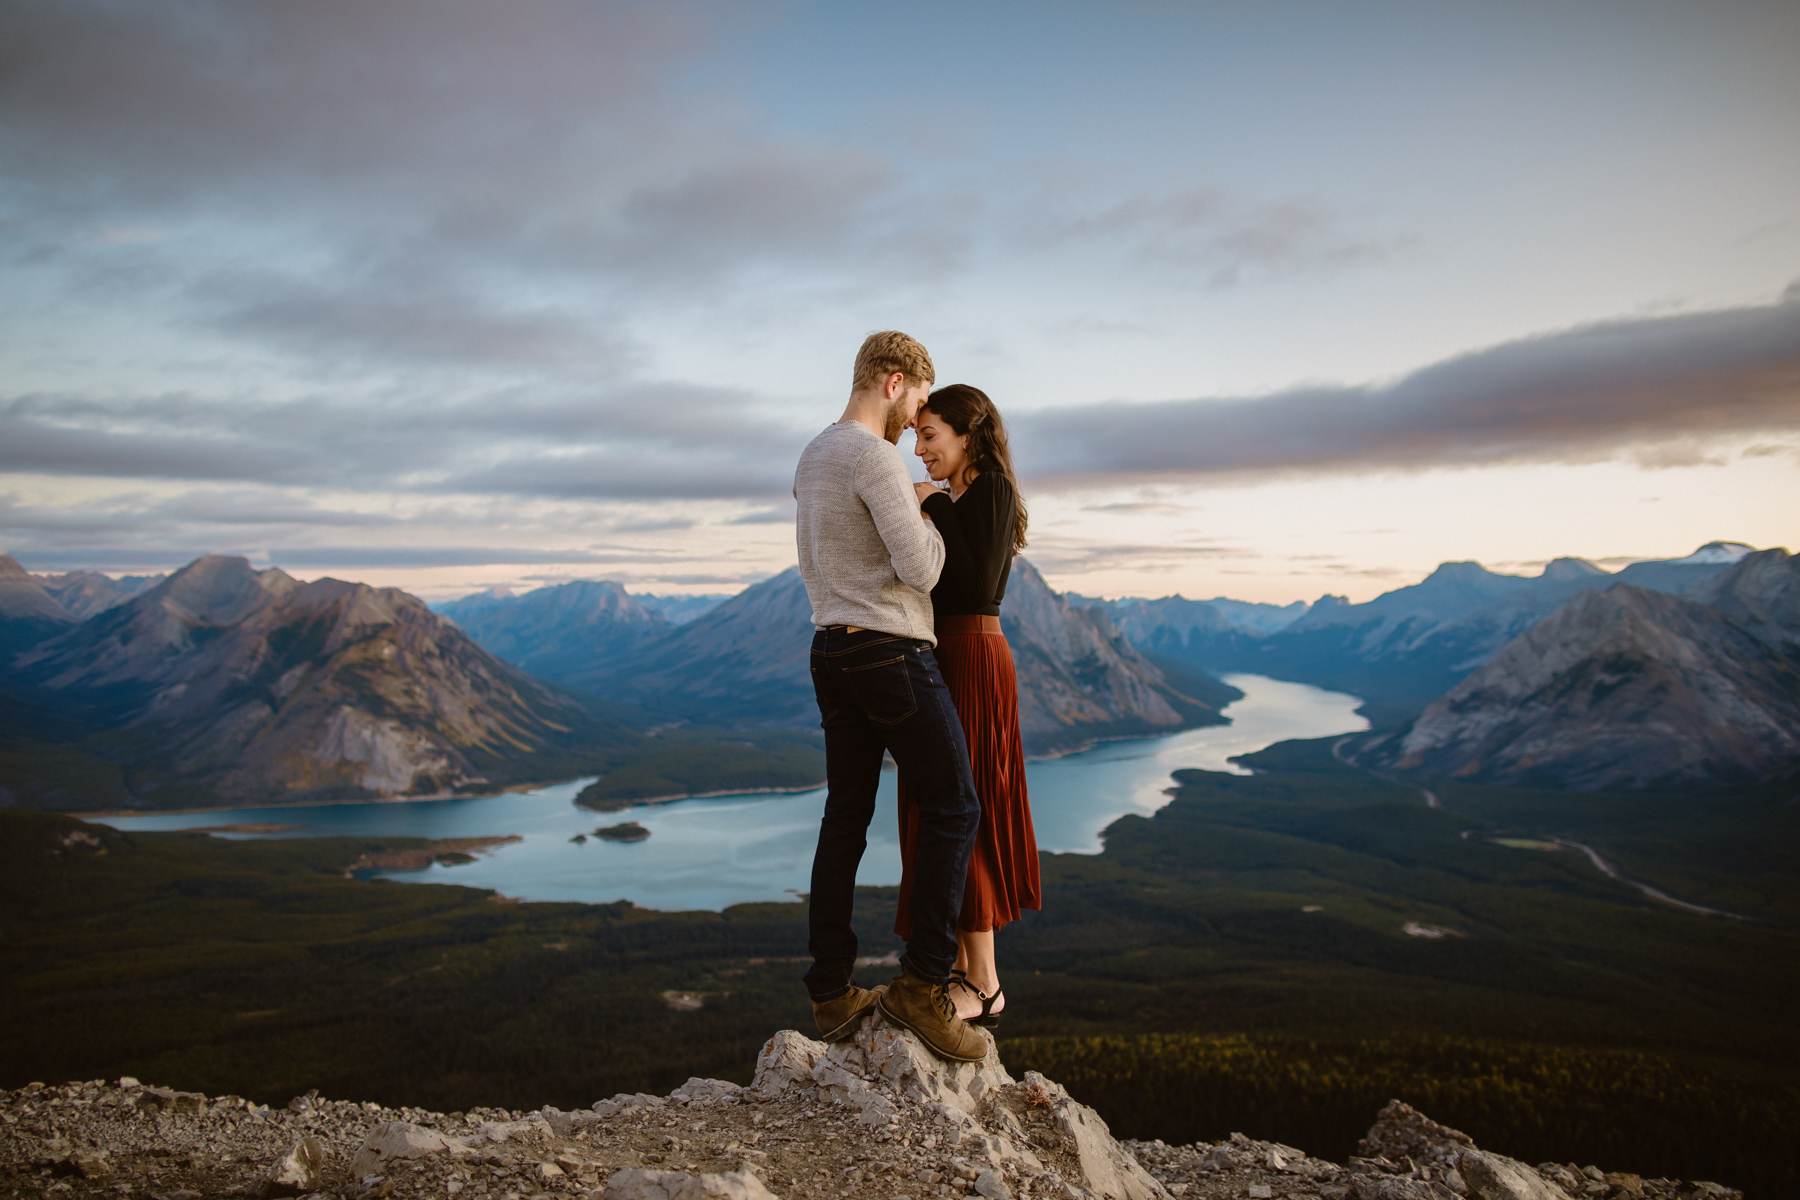 Canmore hiking engagement photos in Kananaskis Country - Image 11